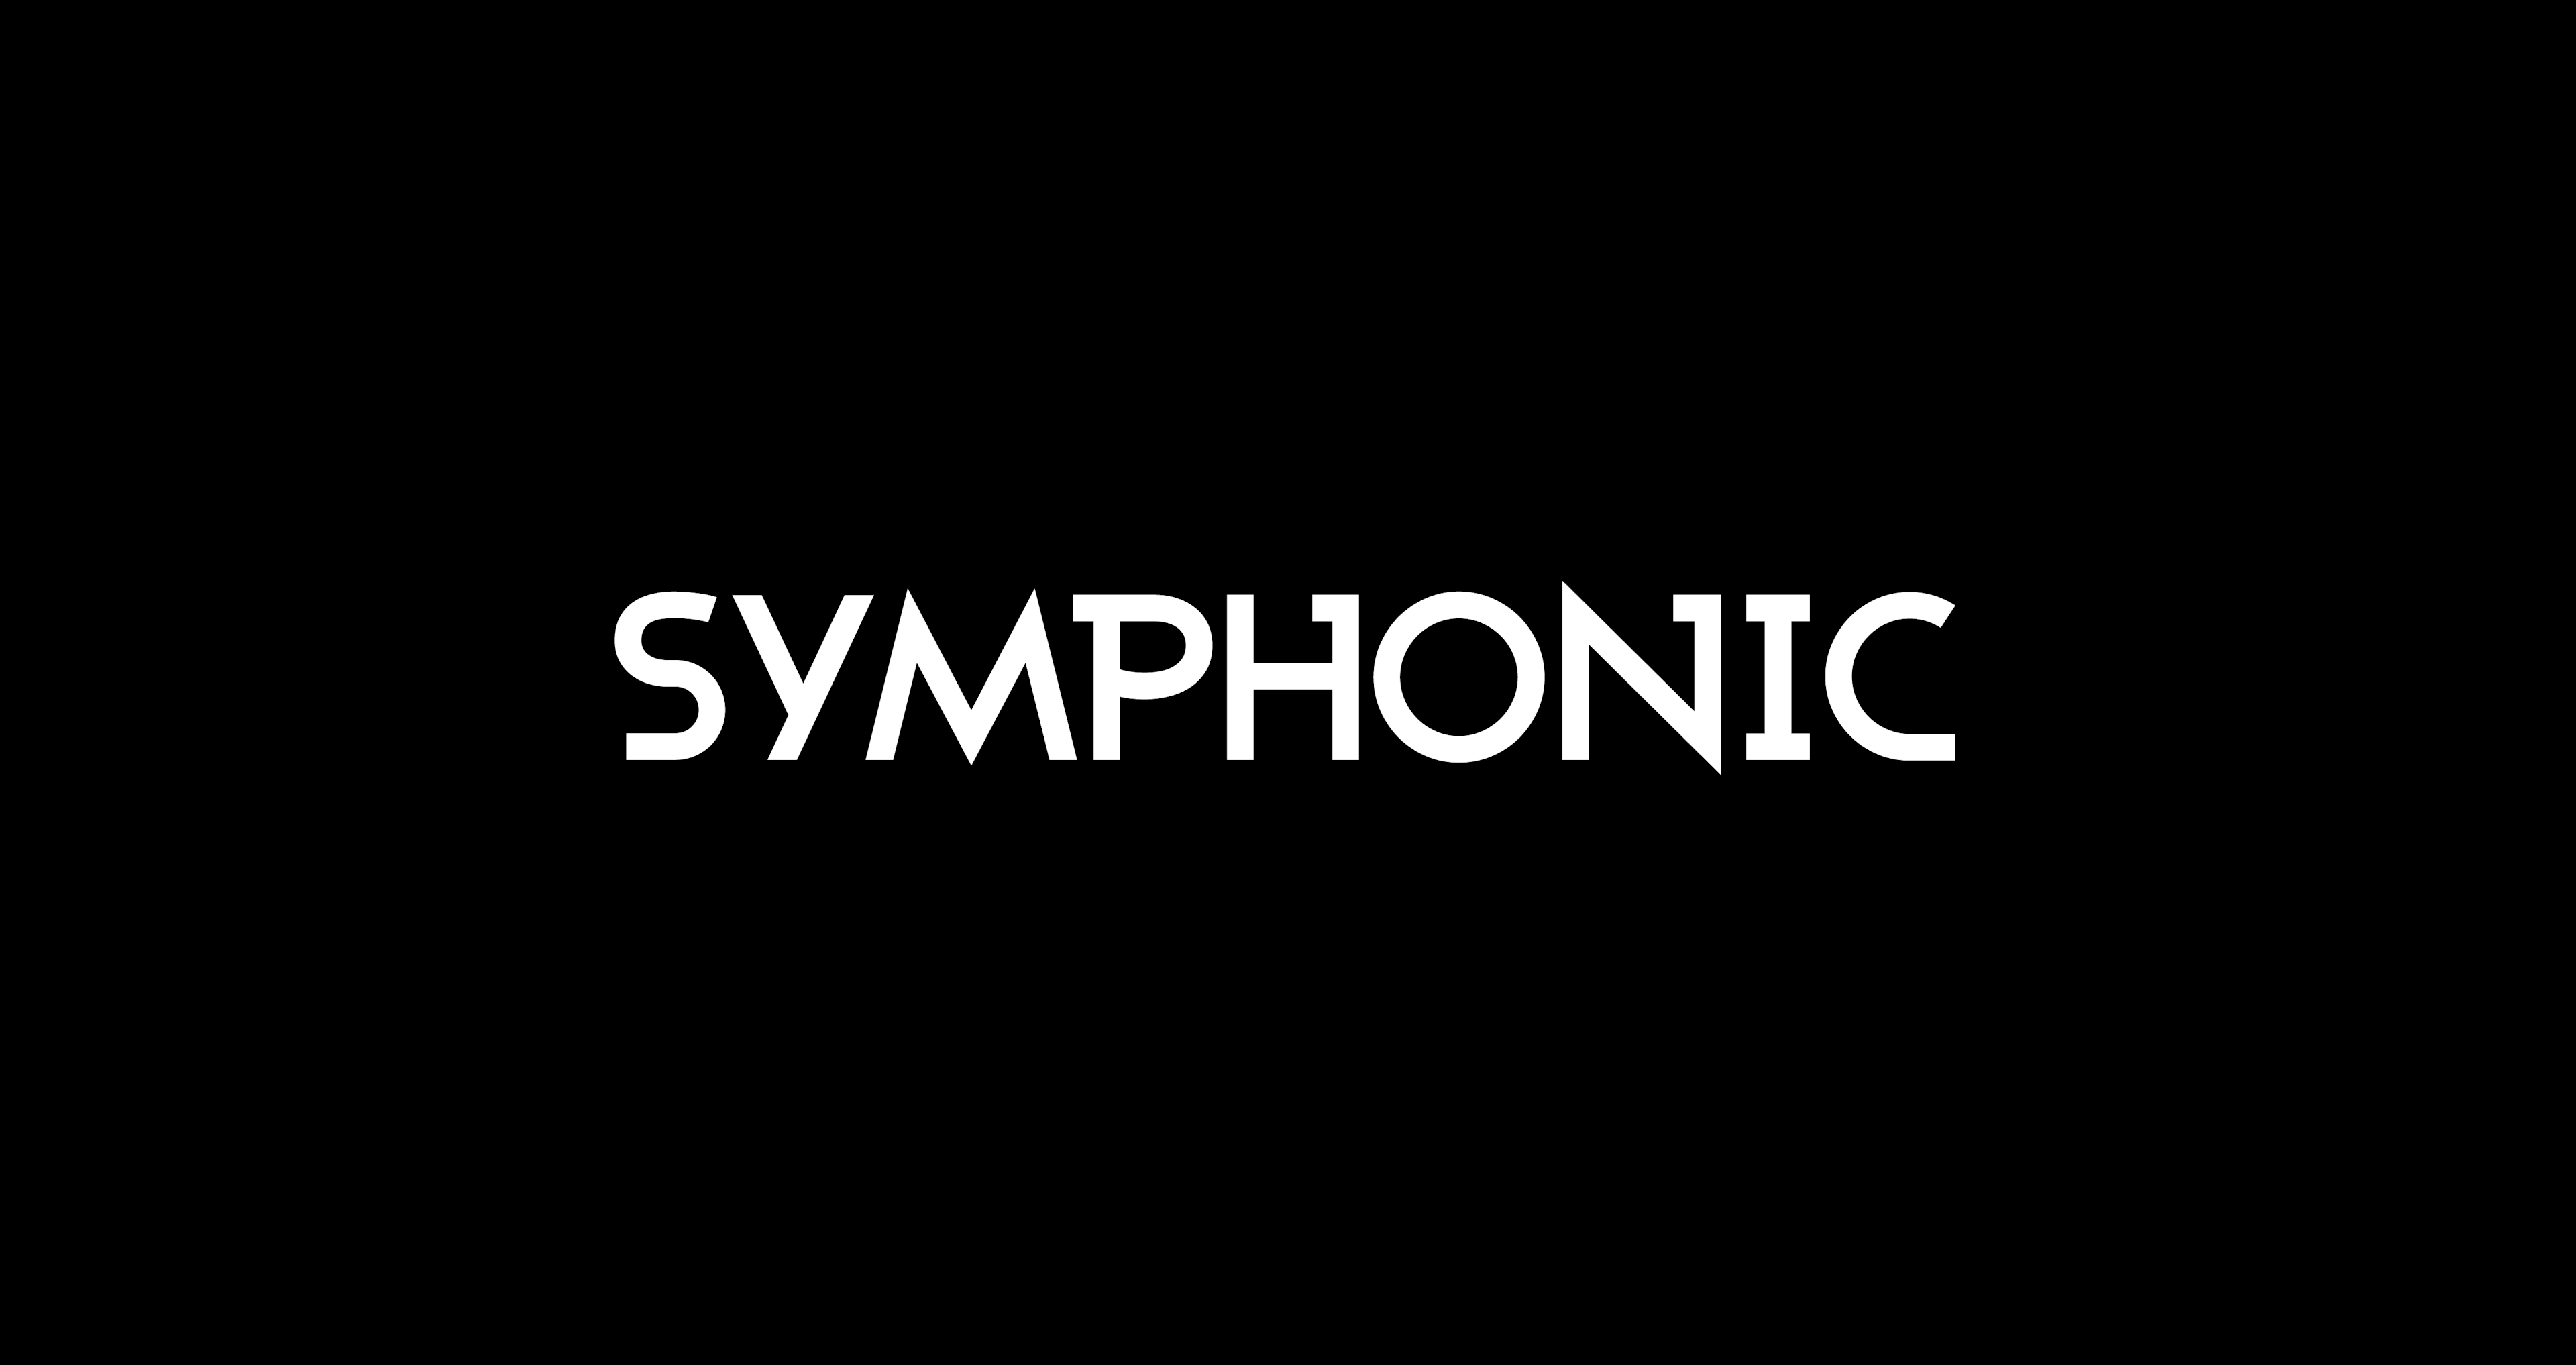 Symphonic distributes music using the SHARE Protocol title